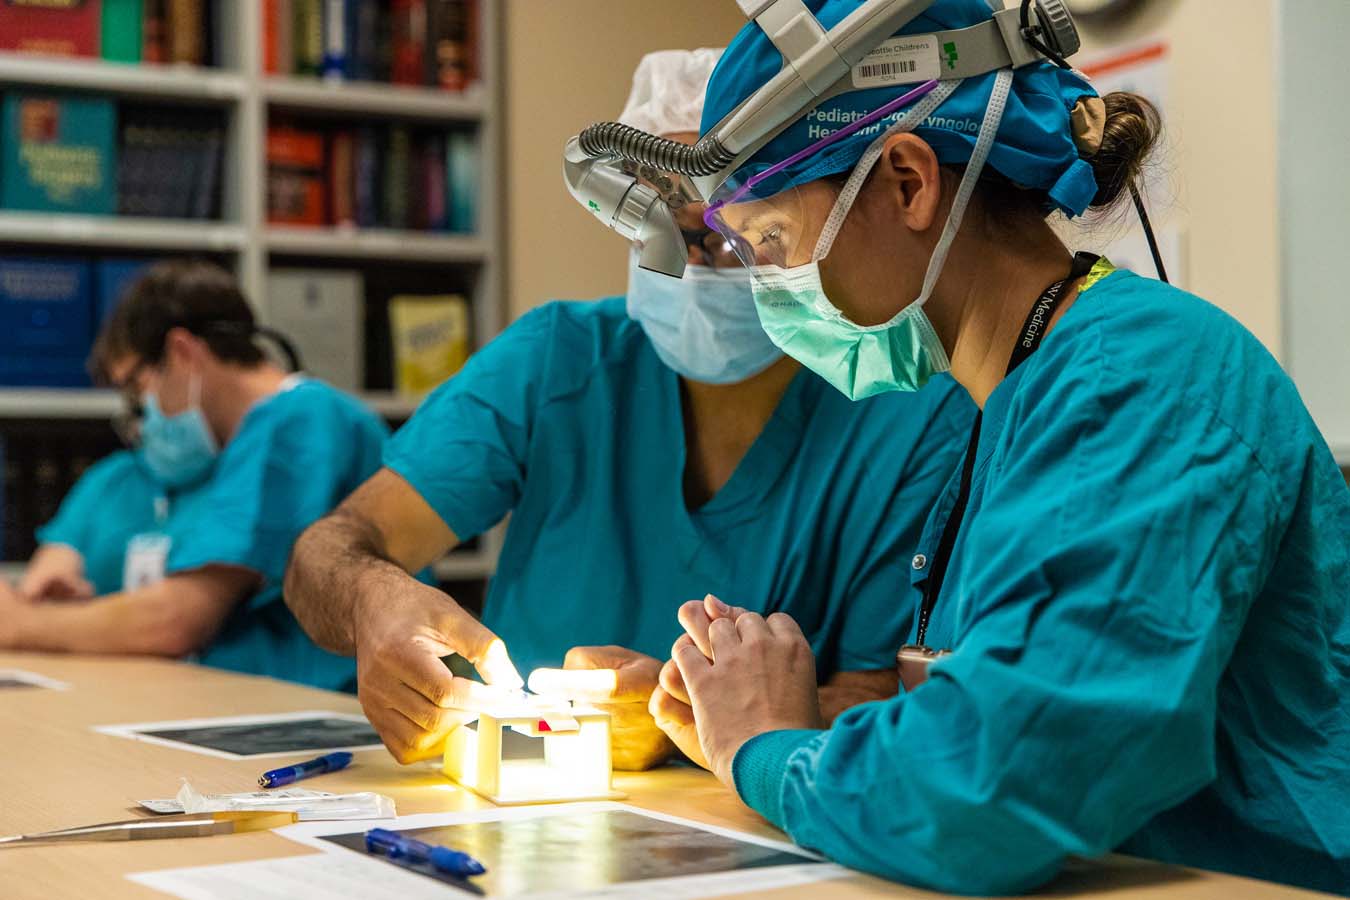 Providers preparing for surgery with 3D model